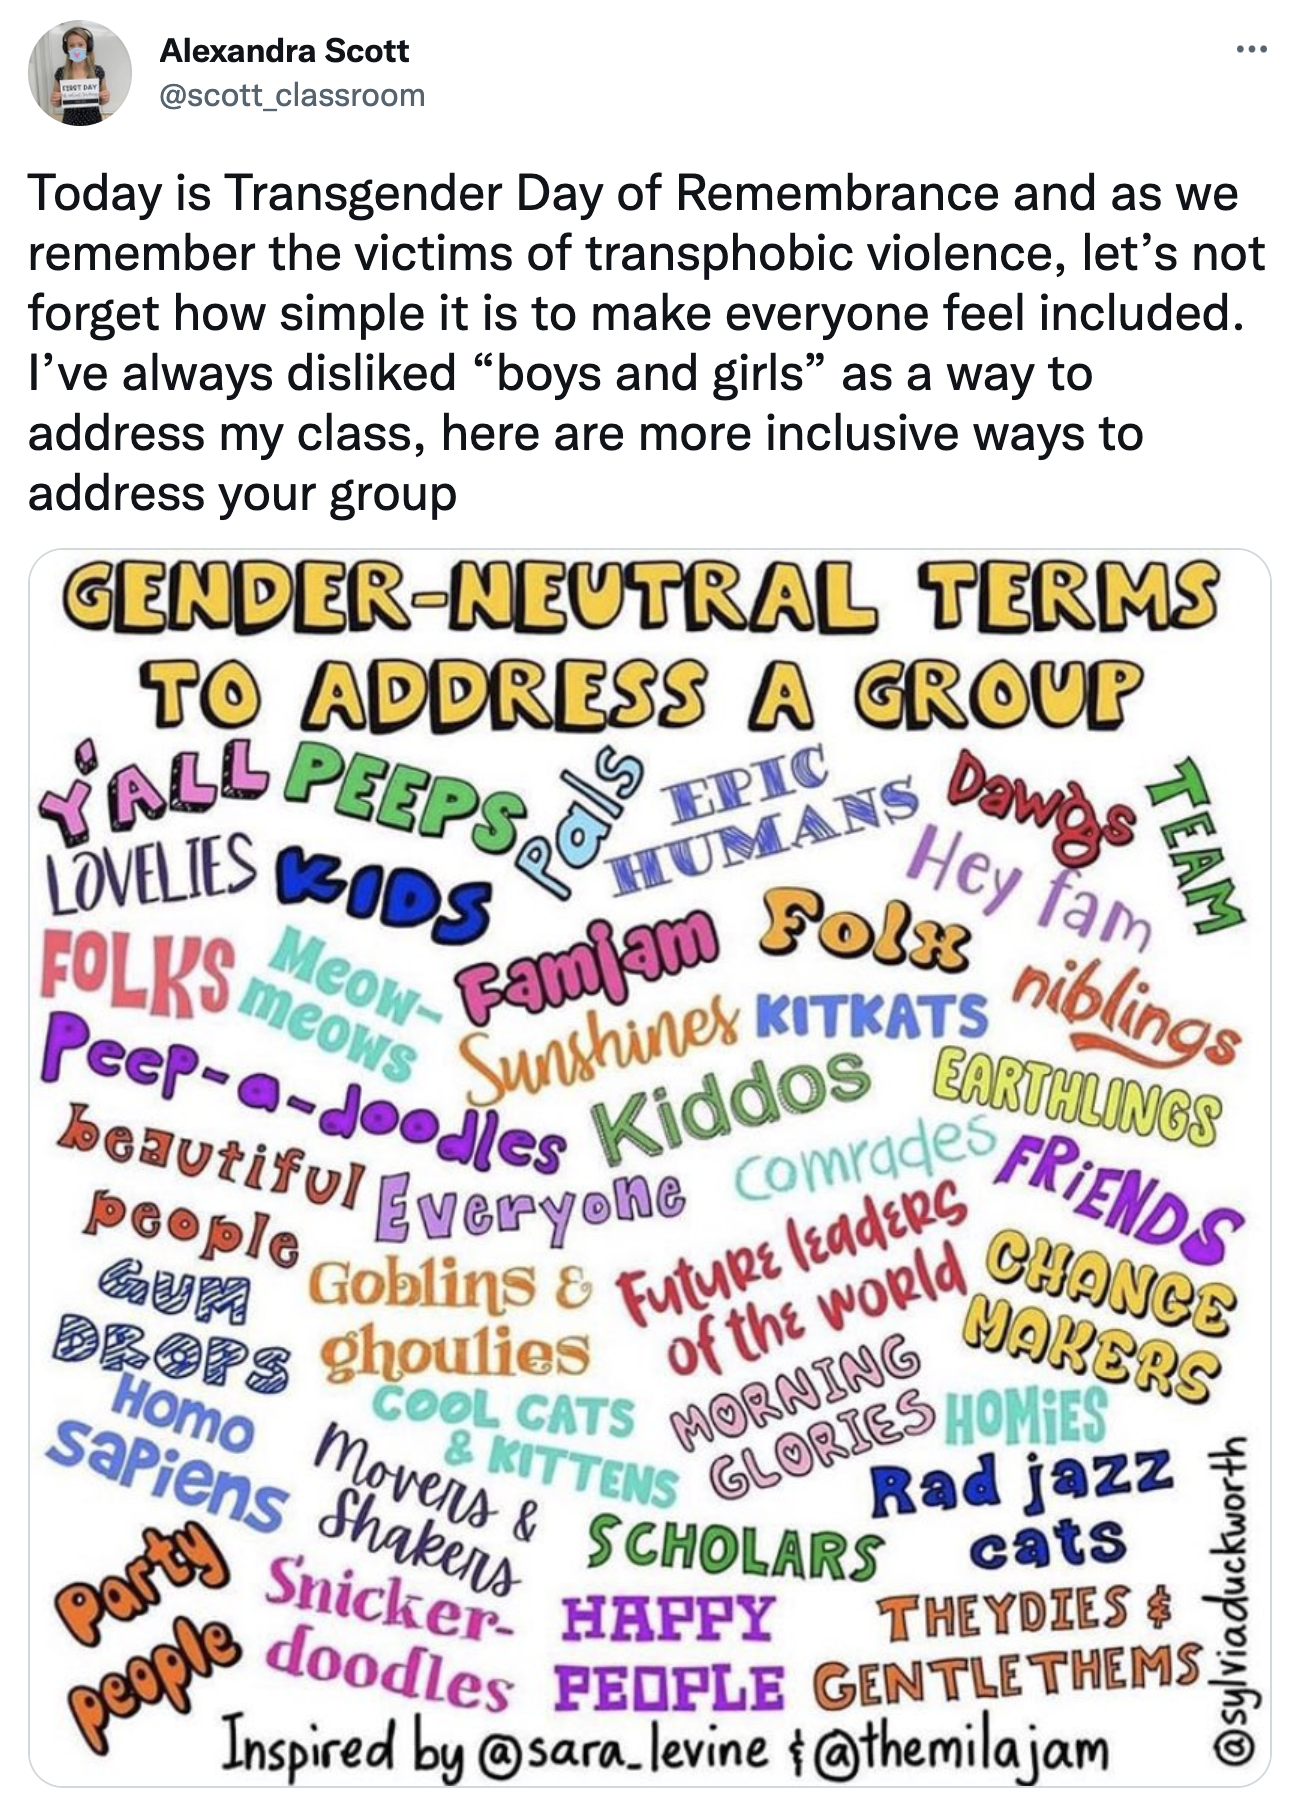 Tweet by Alexandra Scott (@scott_classroom): "Today is Transgender Day of Remembrance and as we remember the victims of transphobic violence, let's not forget how simple it is to make everyone feel included. I've always disliked "boys and girls" as a way to address my class, here are more inclusive ways to address your group"; Image contains many examples of "Gender-Neutral Terms to address a group" in various fonts and colours: "y'all, peeps, lovelies, kids, pals, epic humans, dawgs, team, hey fam, folx, famjam, meow-meows, folks, kitkats, sunshines, niblings, pee-a-doodles, kiddos, earthlings, comrades, everyone, beautiful people, gum drops, homo sapiens, party people, snicker-doodles, future leaders of the world, morning glories, homies, change makers, friends, rad jazz cats, theydies, & gentlethems, happy people, scholars, movers & shakers"